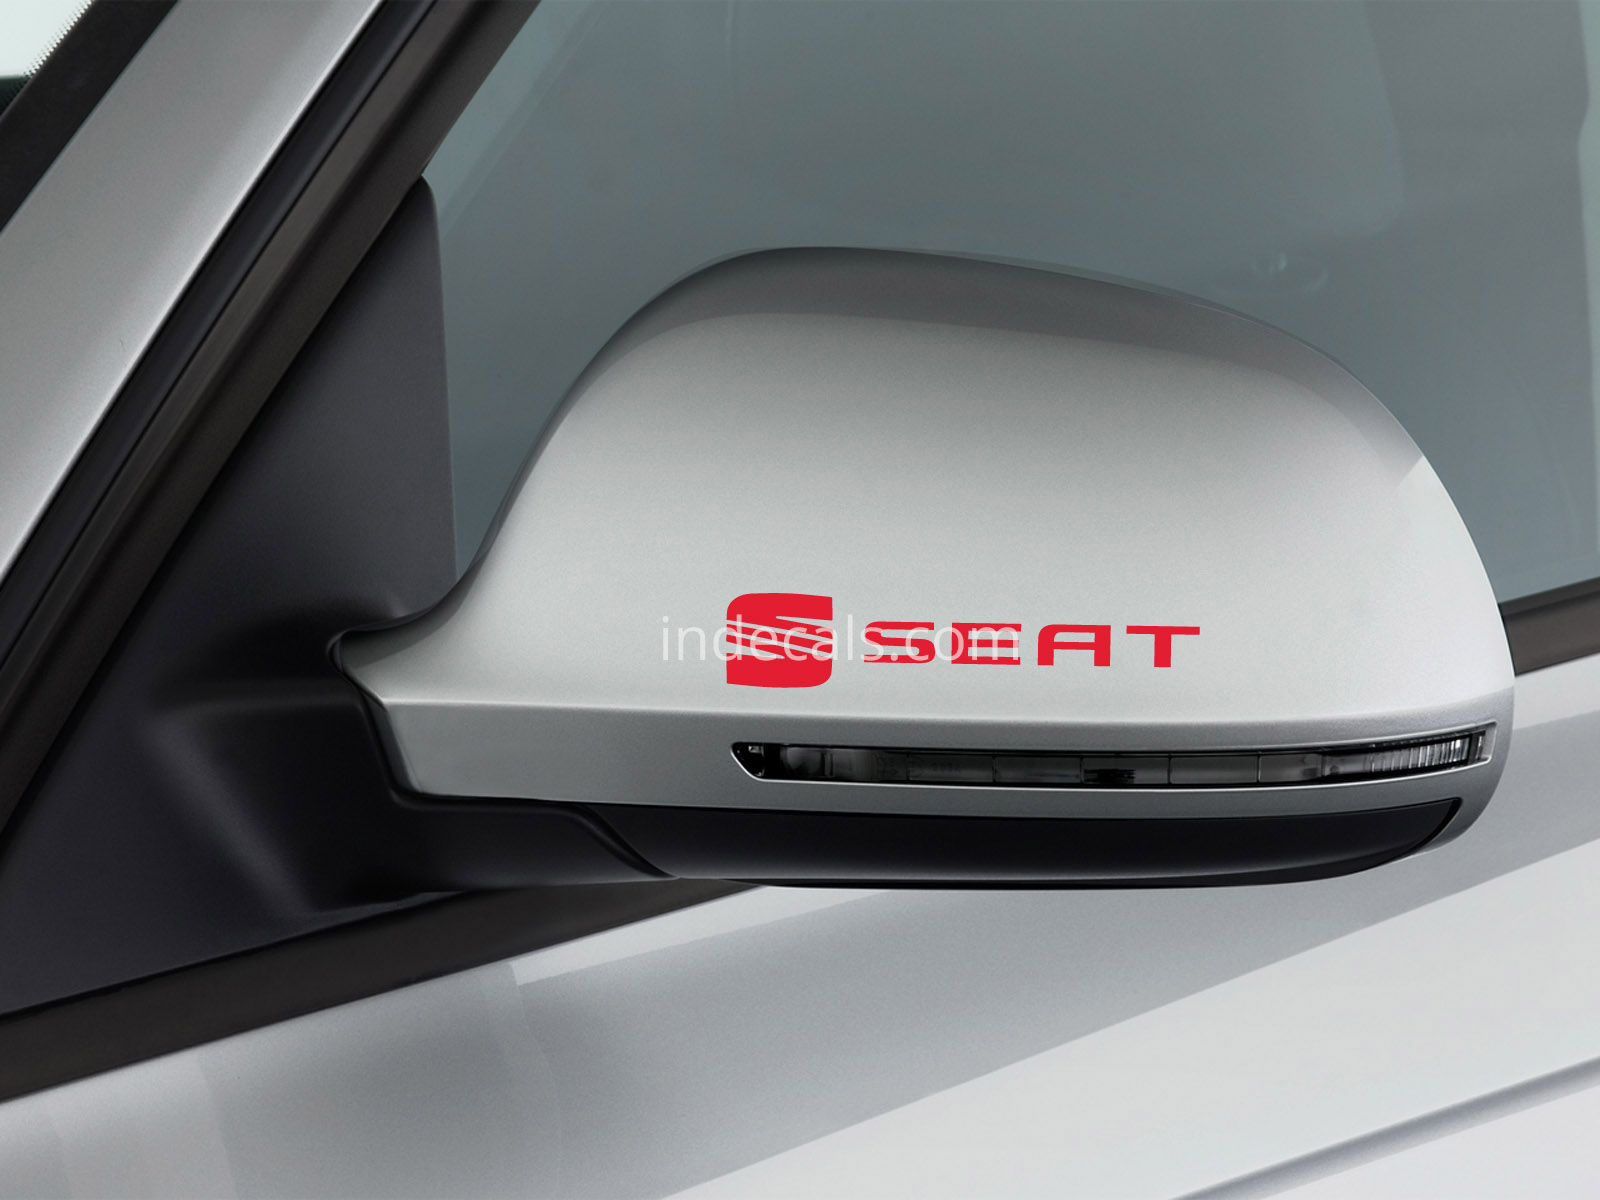 3 x Seat Stickers for Mirrors - Red